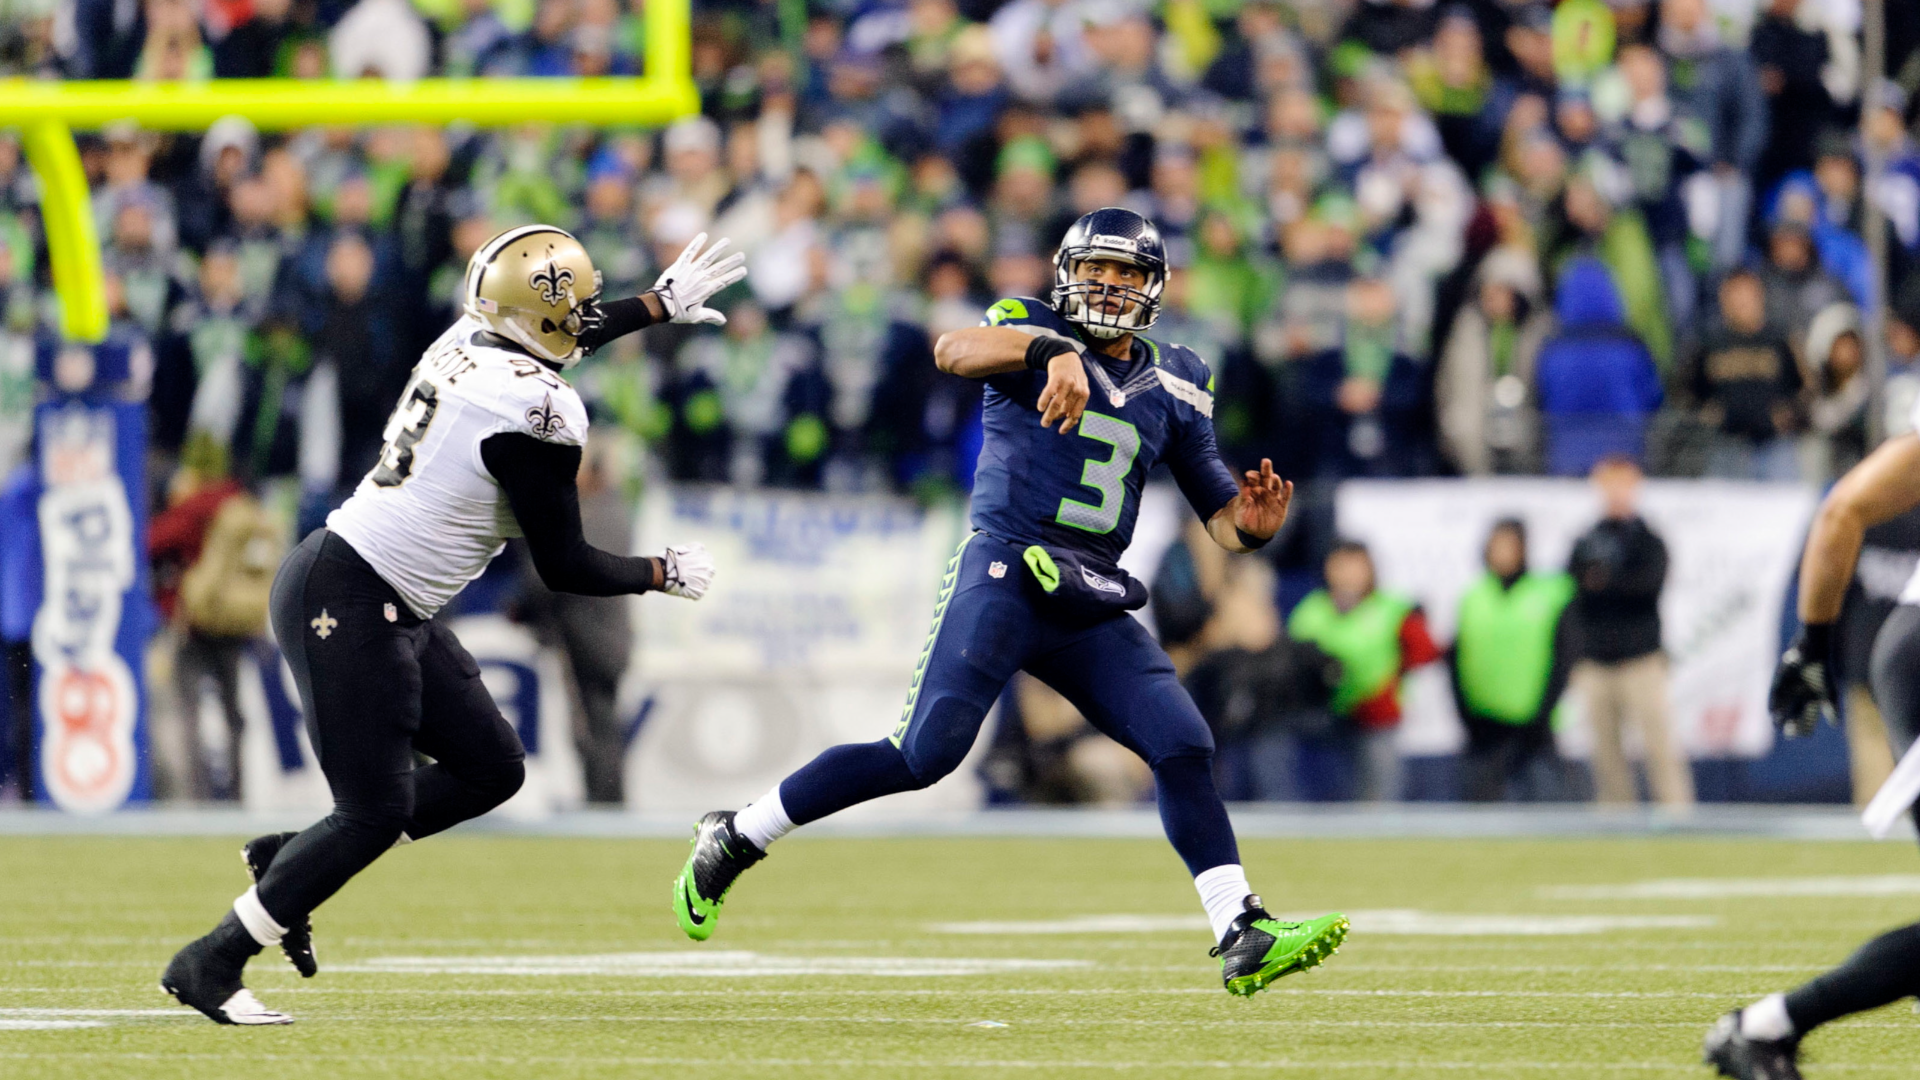 NFL game preview: Seahawks at 49ers